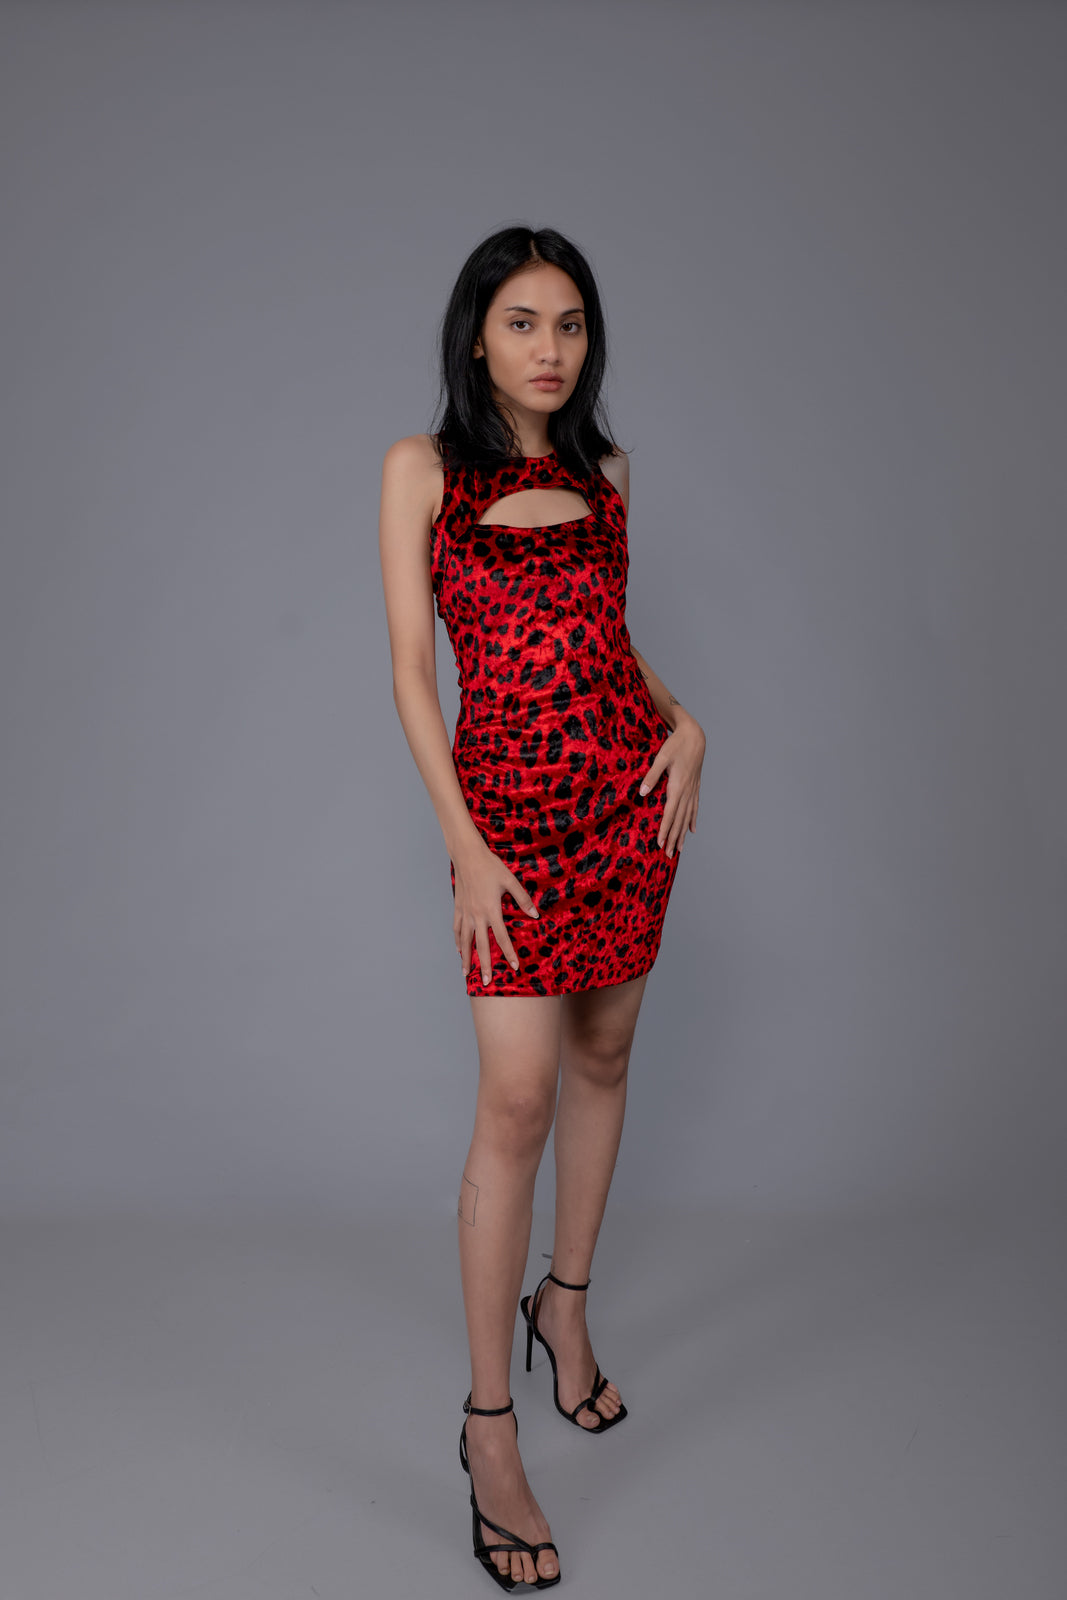 ANIMAL PRINTED BODY CON MINI DRESS WITH CUT-OUT DETAIL